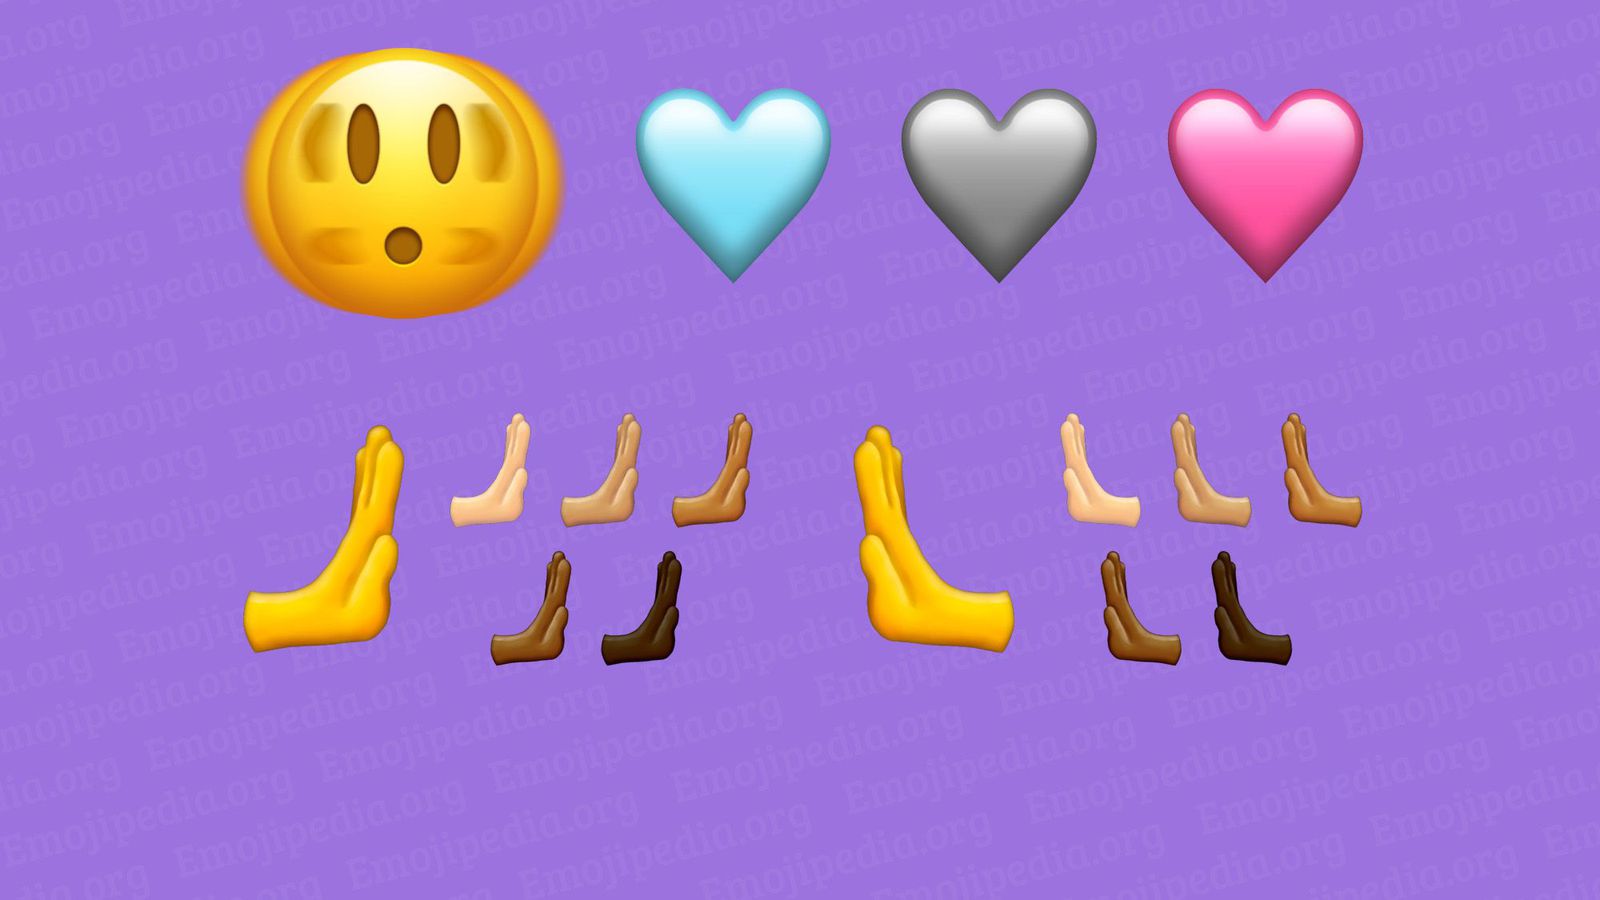 See the 102 Emojis That Could Be Coming to iPhones This Year